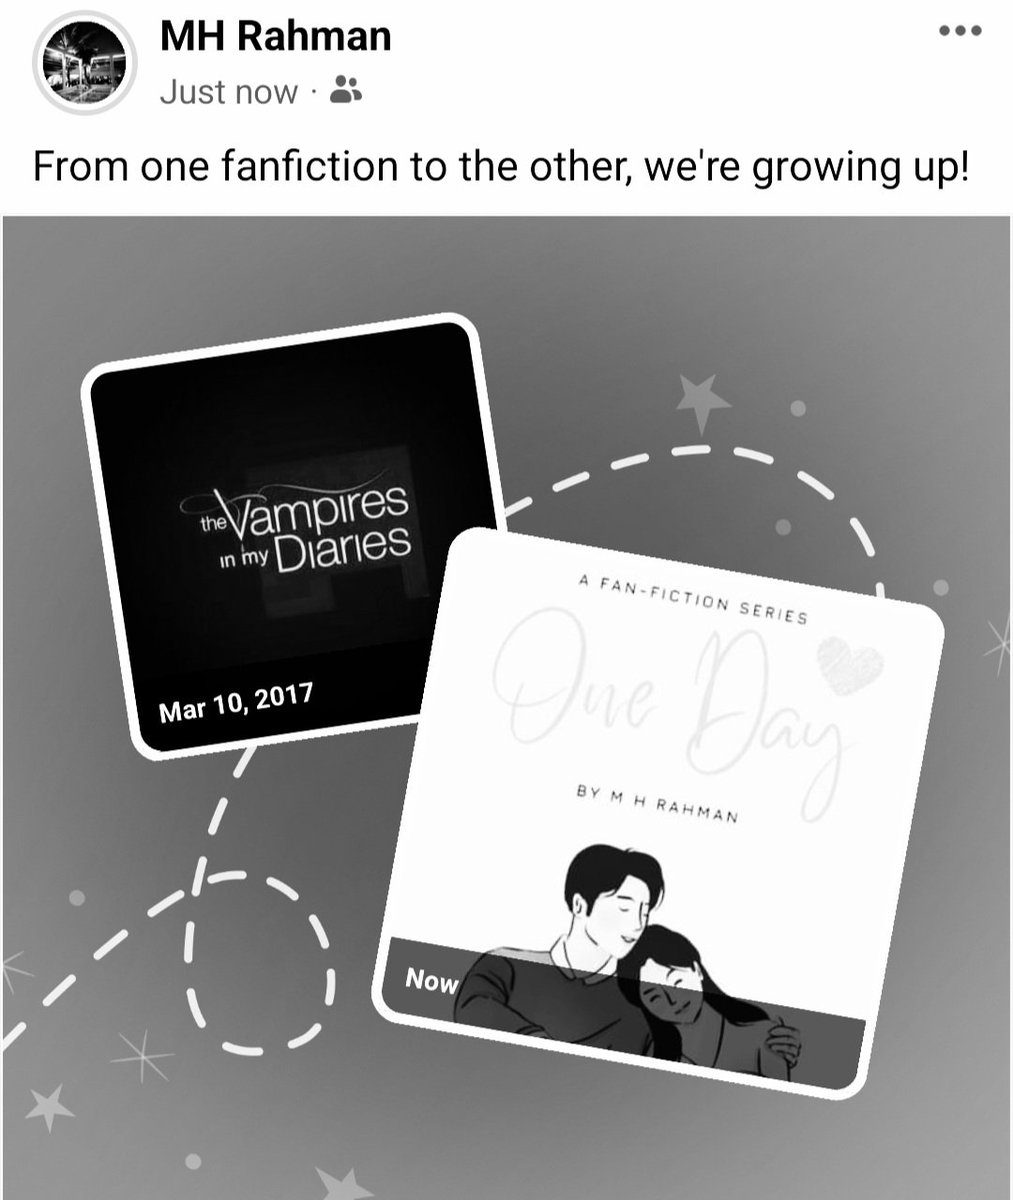 From one fanfiction to the other, we're growing up!